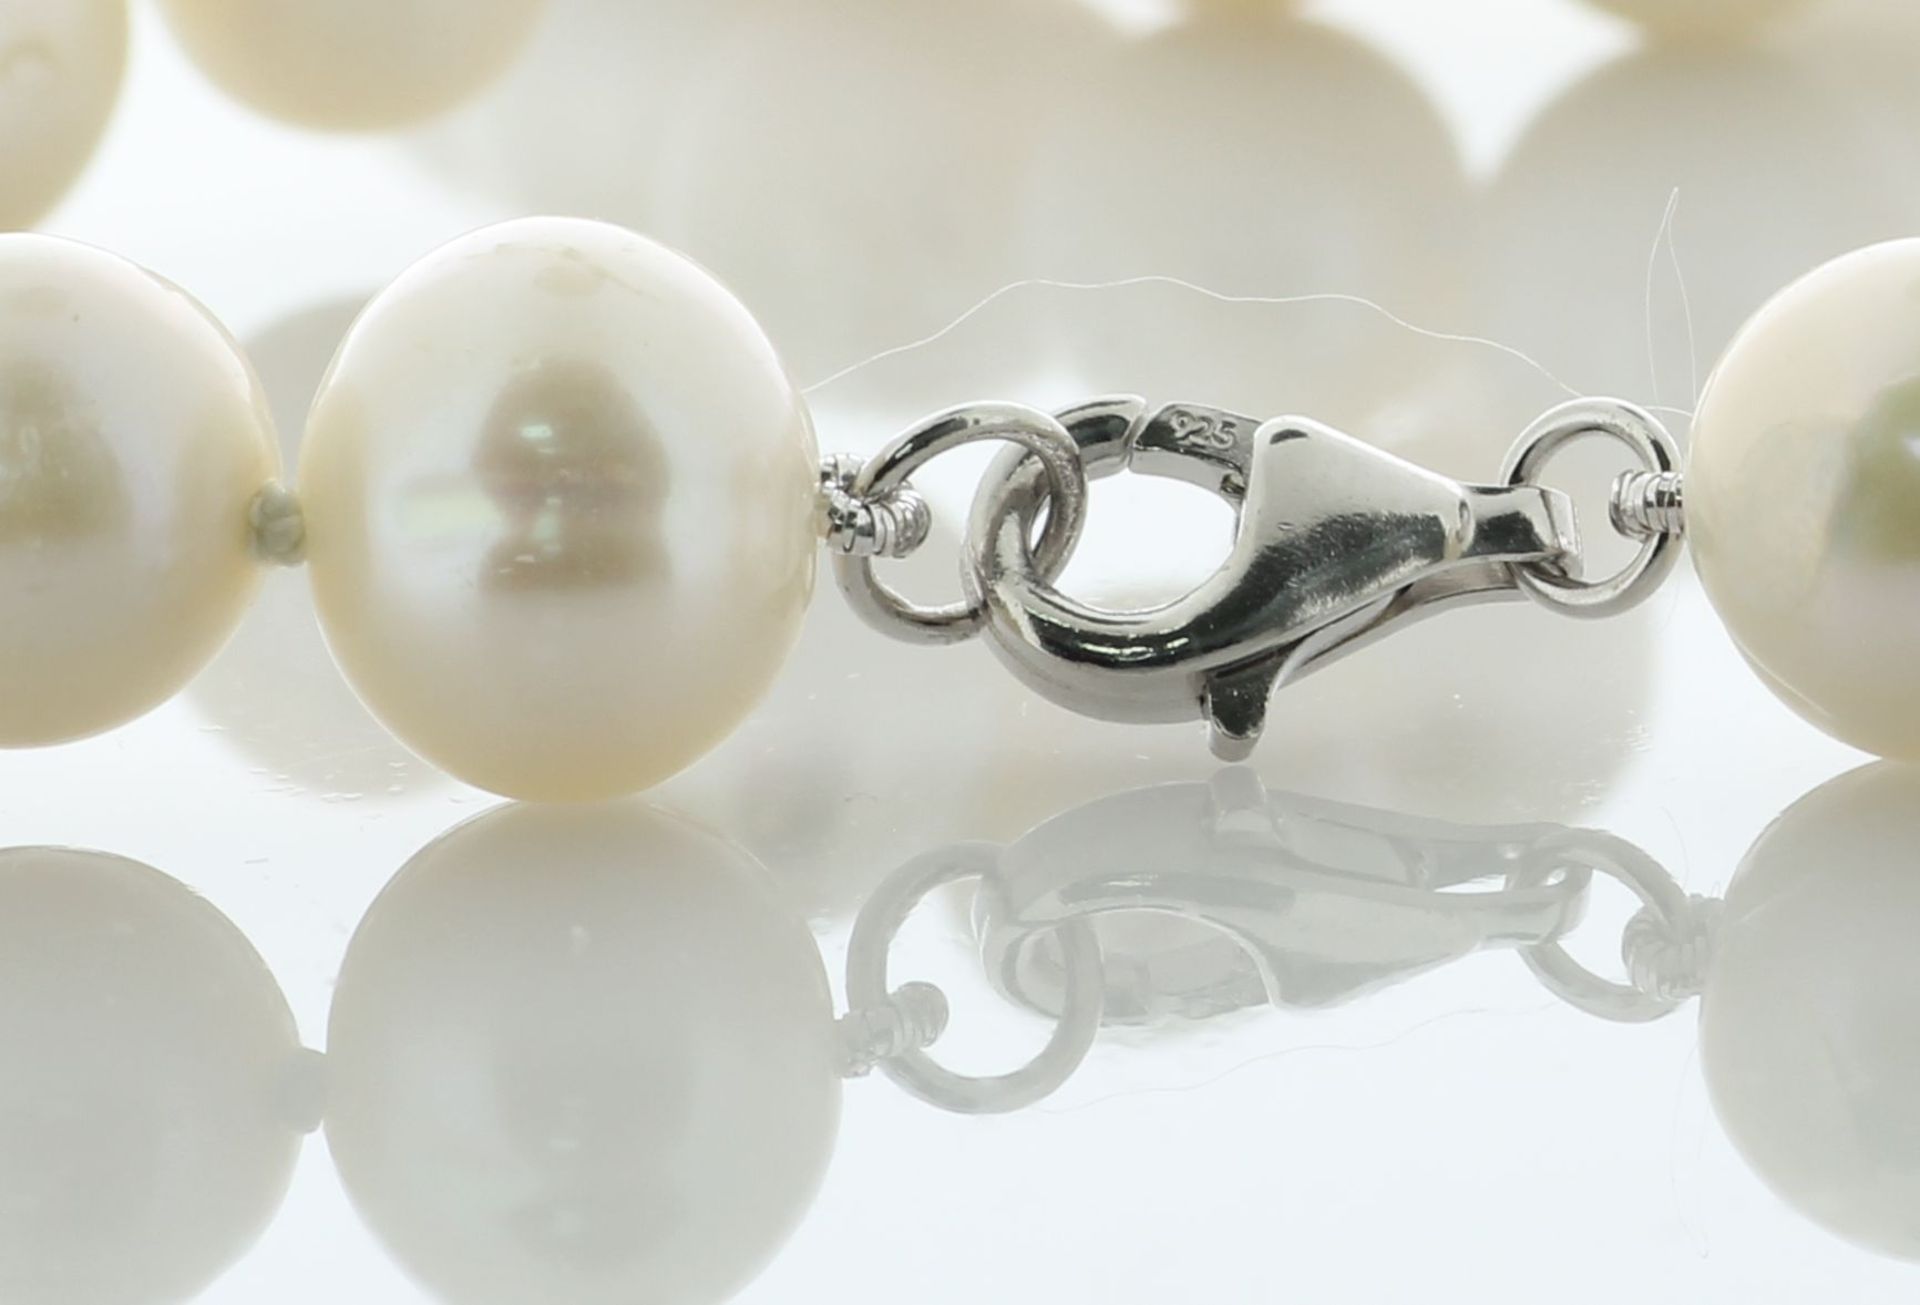 26 inch Round Freshwater Cultured 8.5 - 9.0mm Pearl Necklace With Silver Ball Clasp - Image 3 of 6